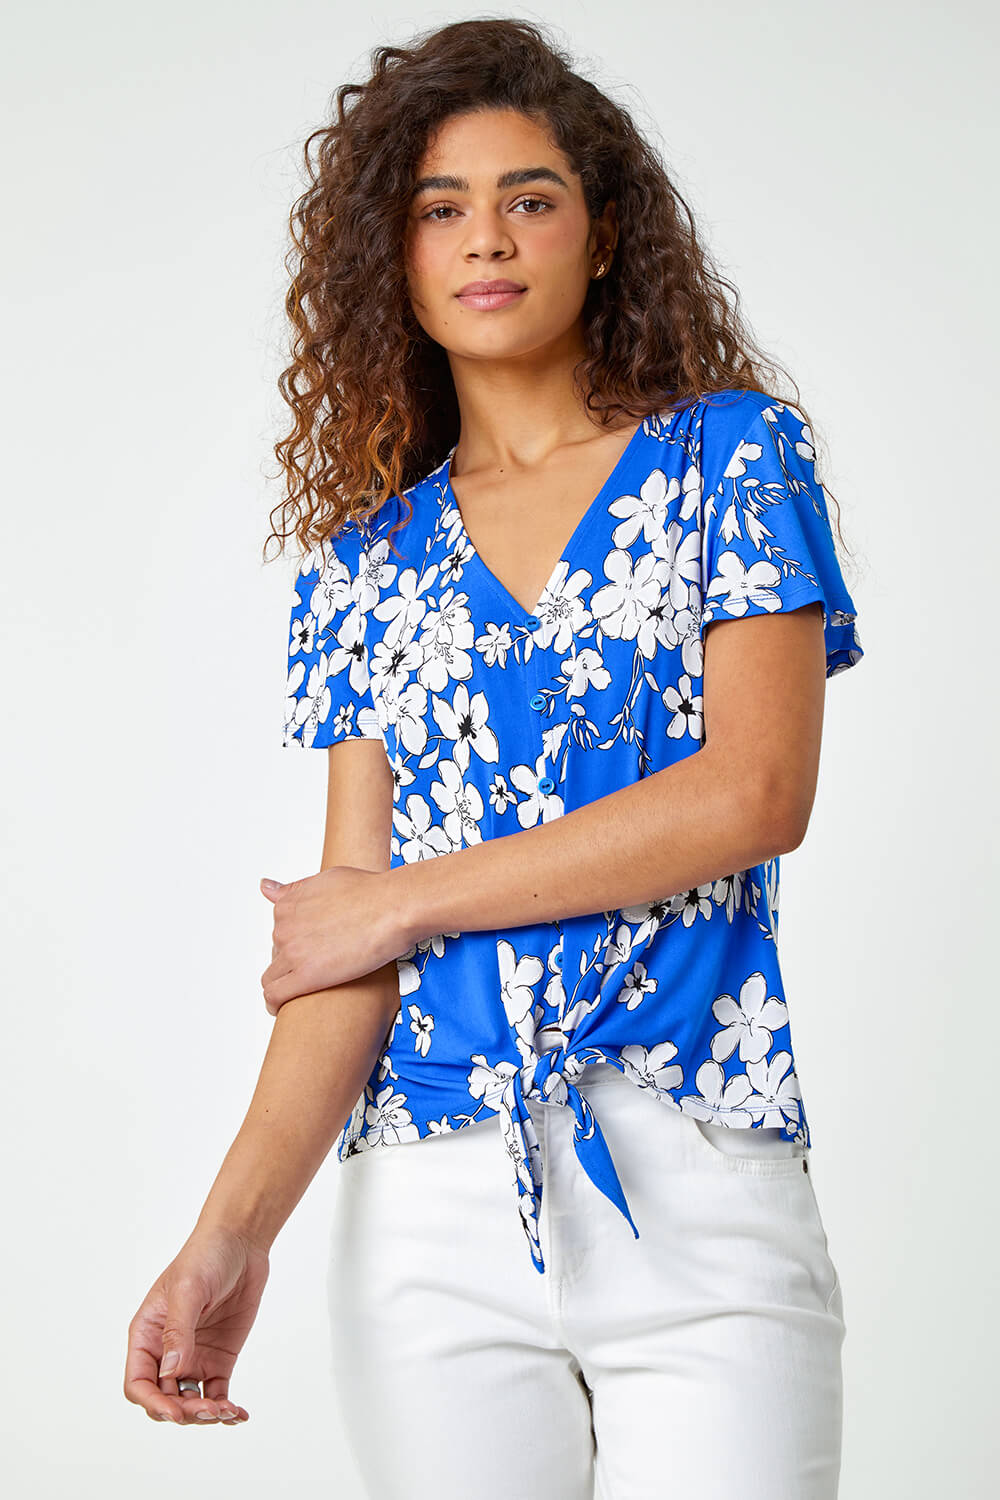 Royal Blue Floral Print Tie Front Top, Image 1 of 5